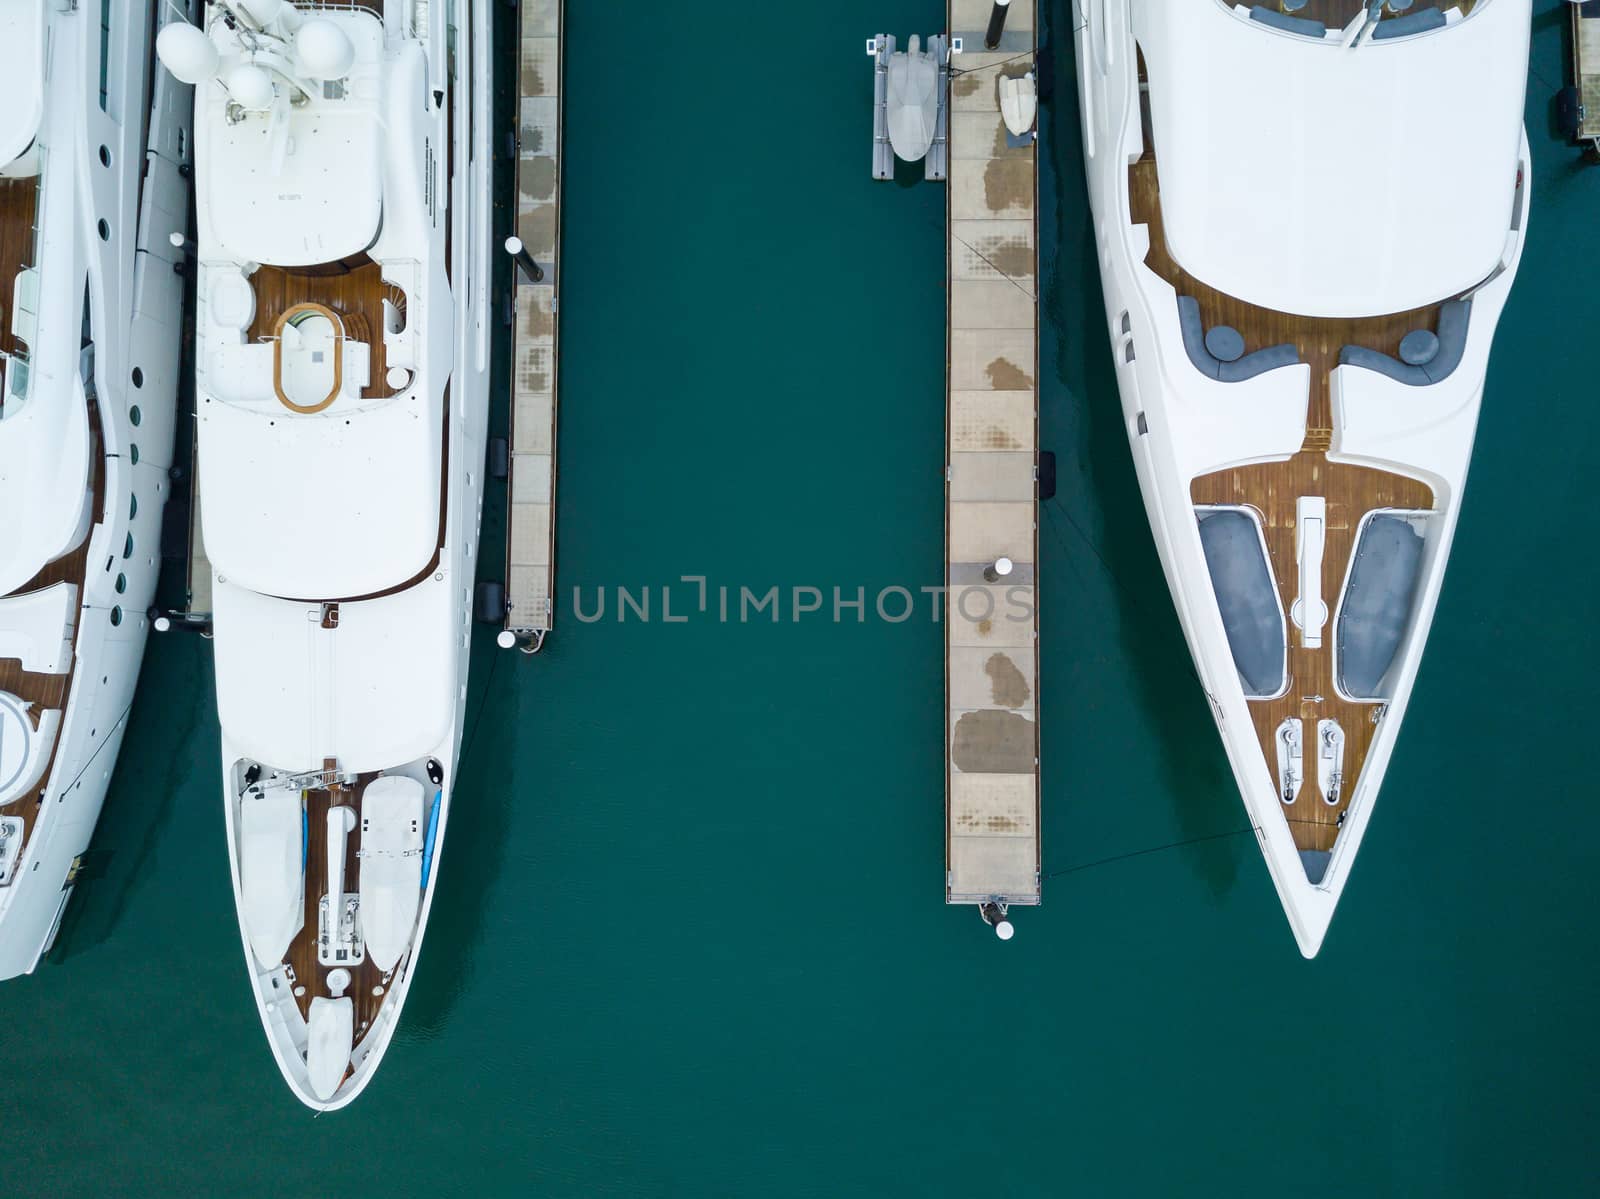 Yachts in marina aerial view by dutourdumonde